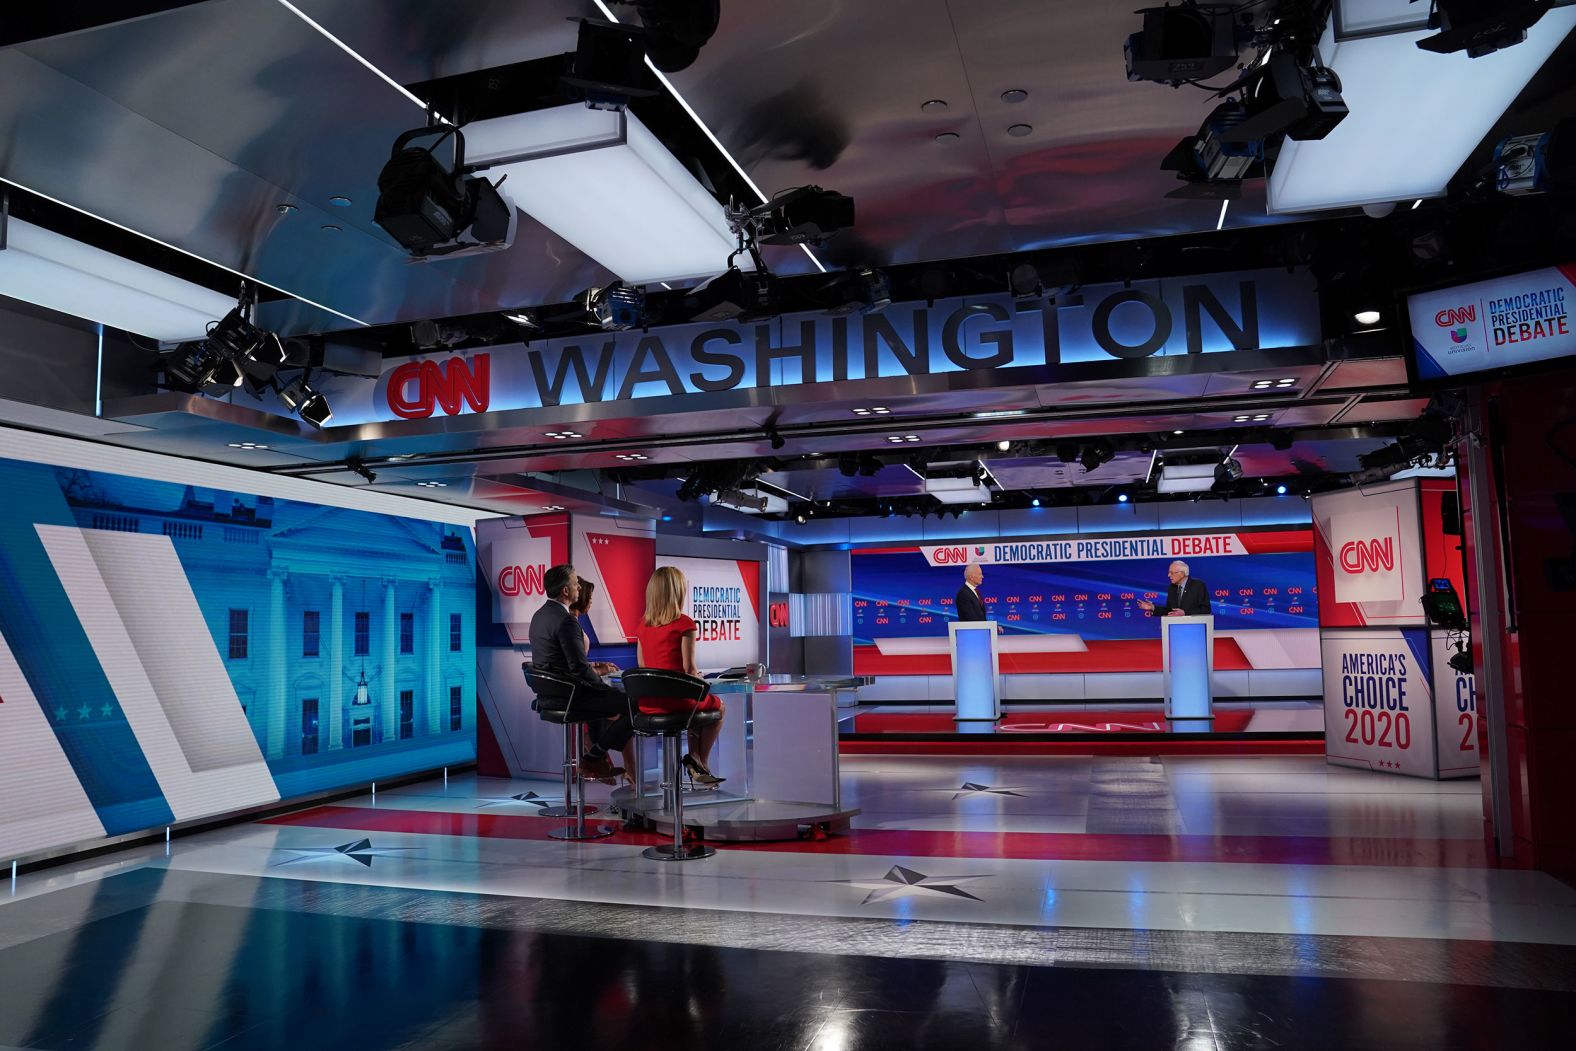 The debate is taking place in CNN's Washington studios. There is no live audience.